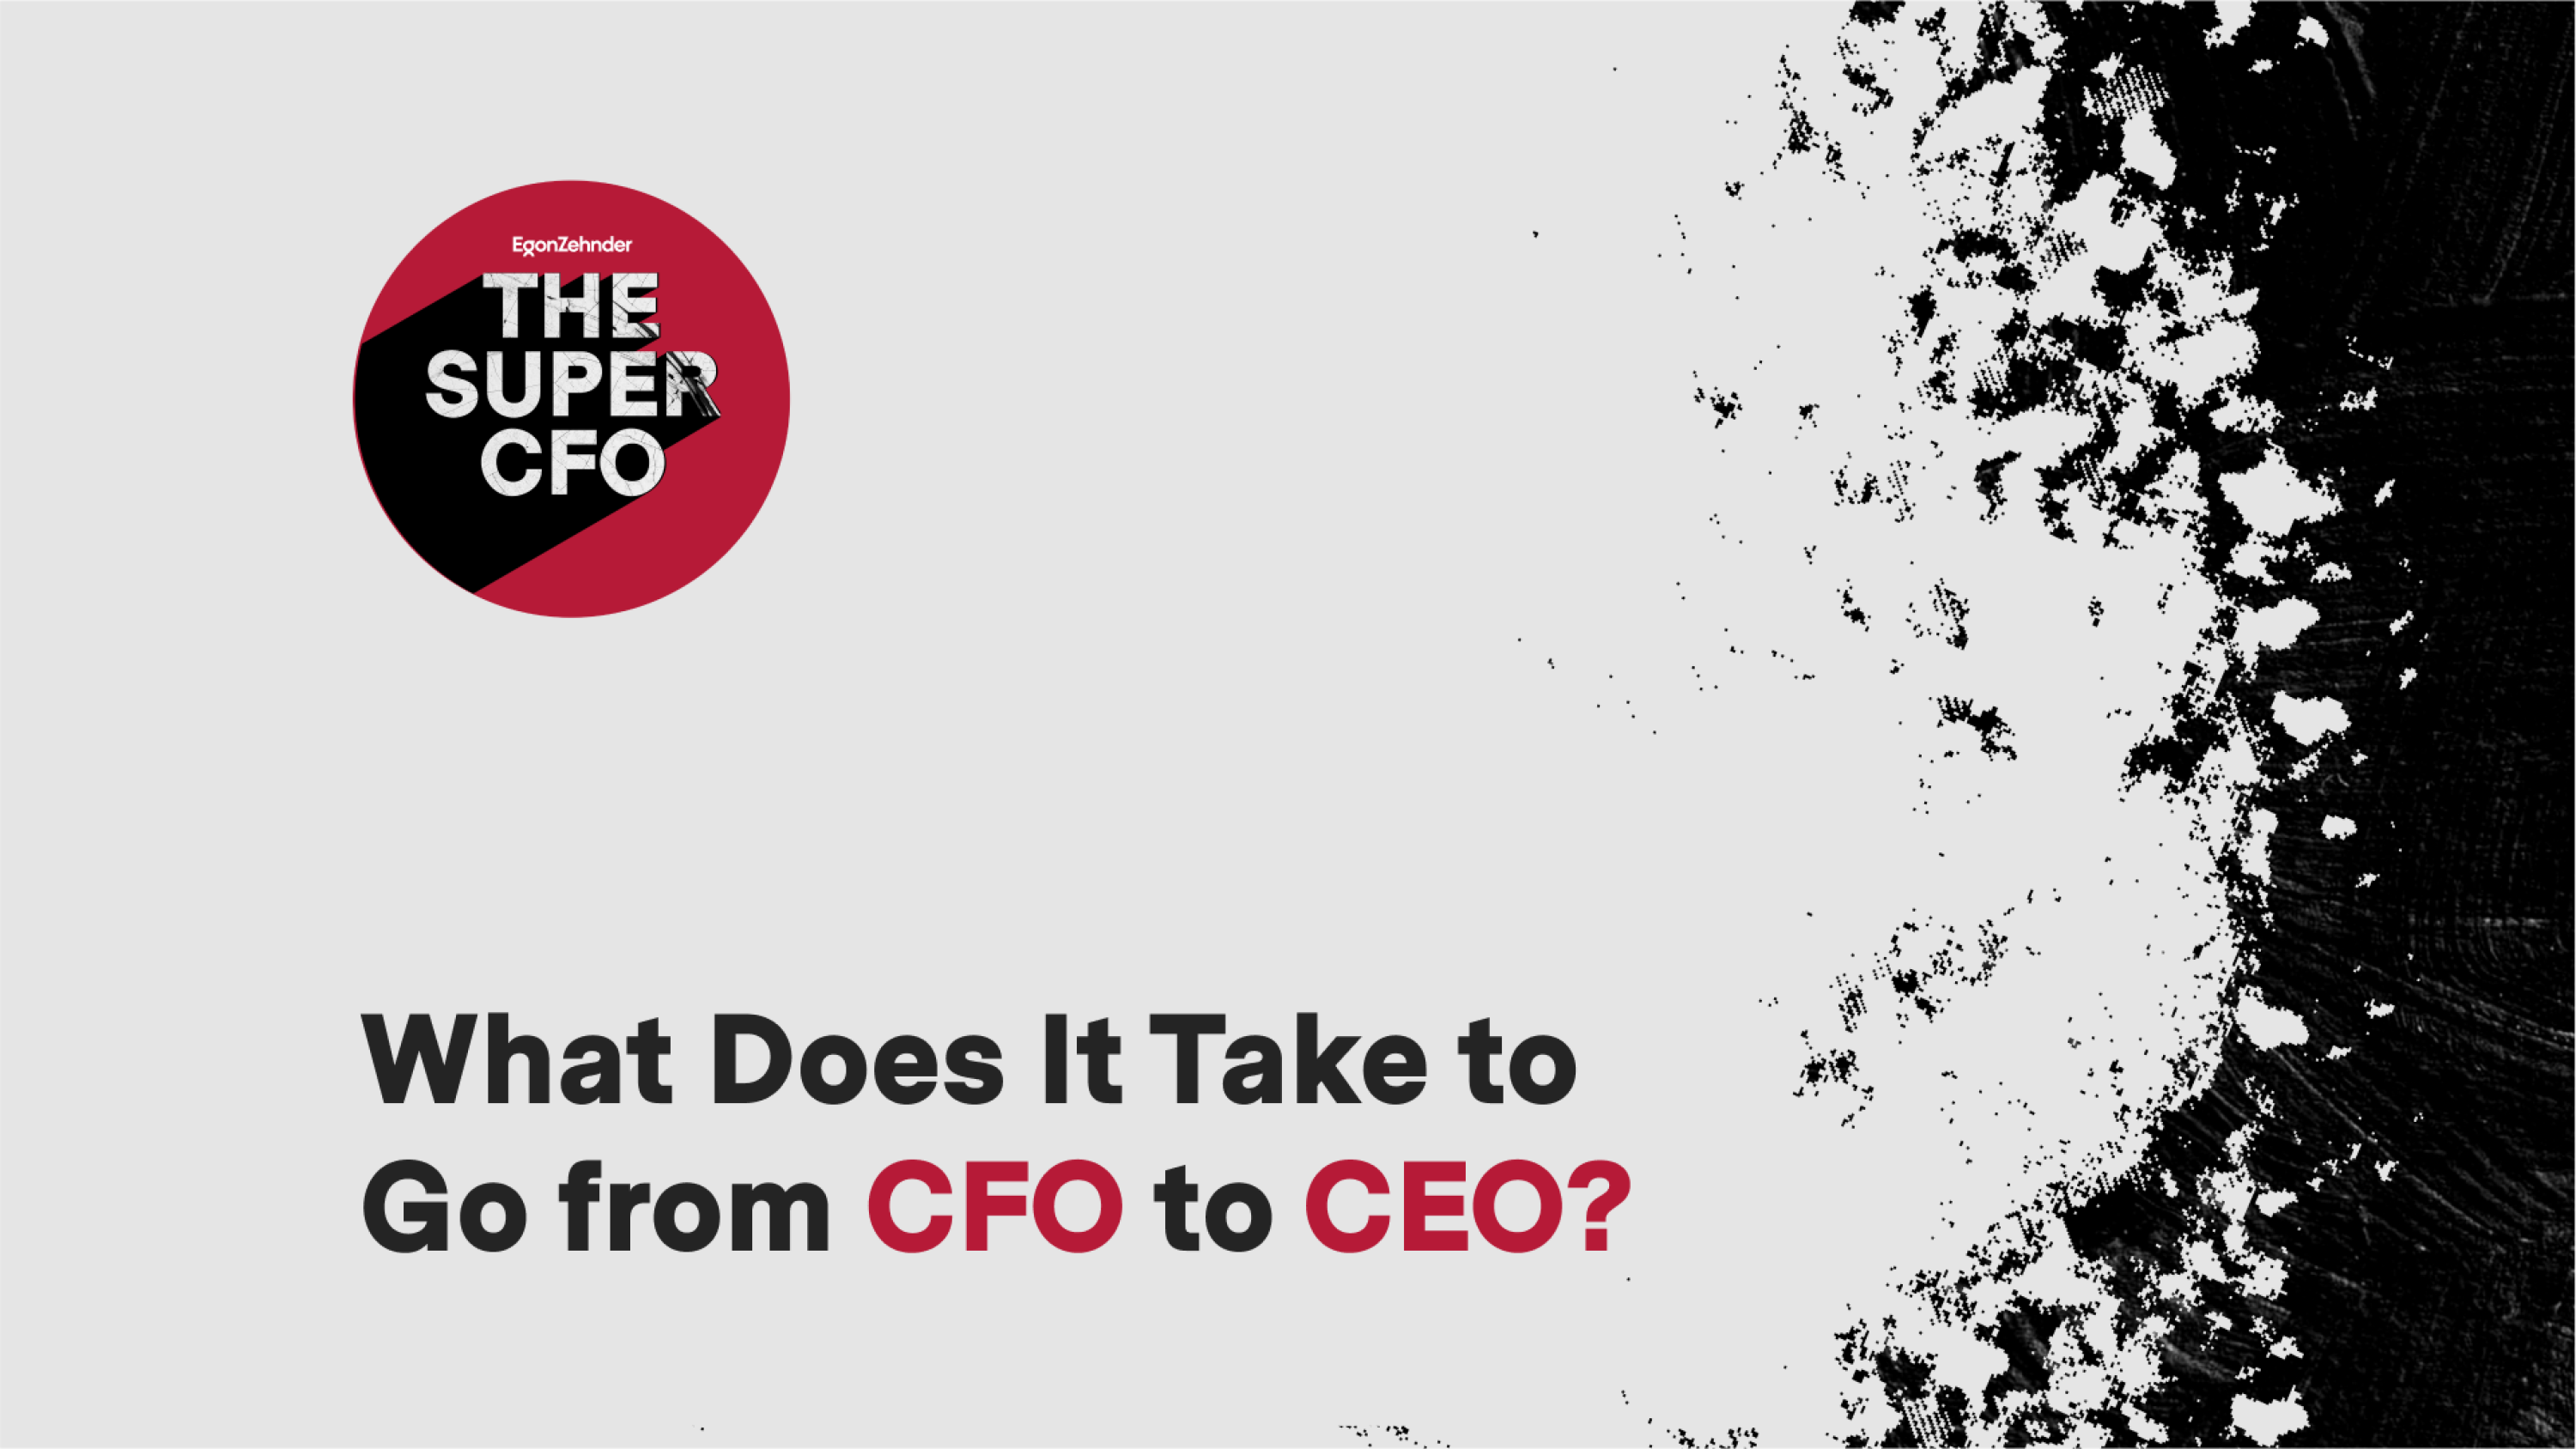 What Does It Take to Go from CFO to CEO?